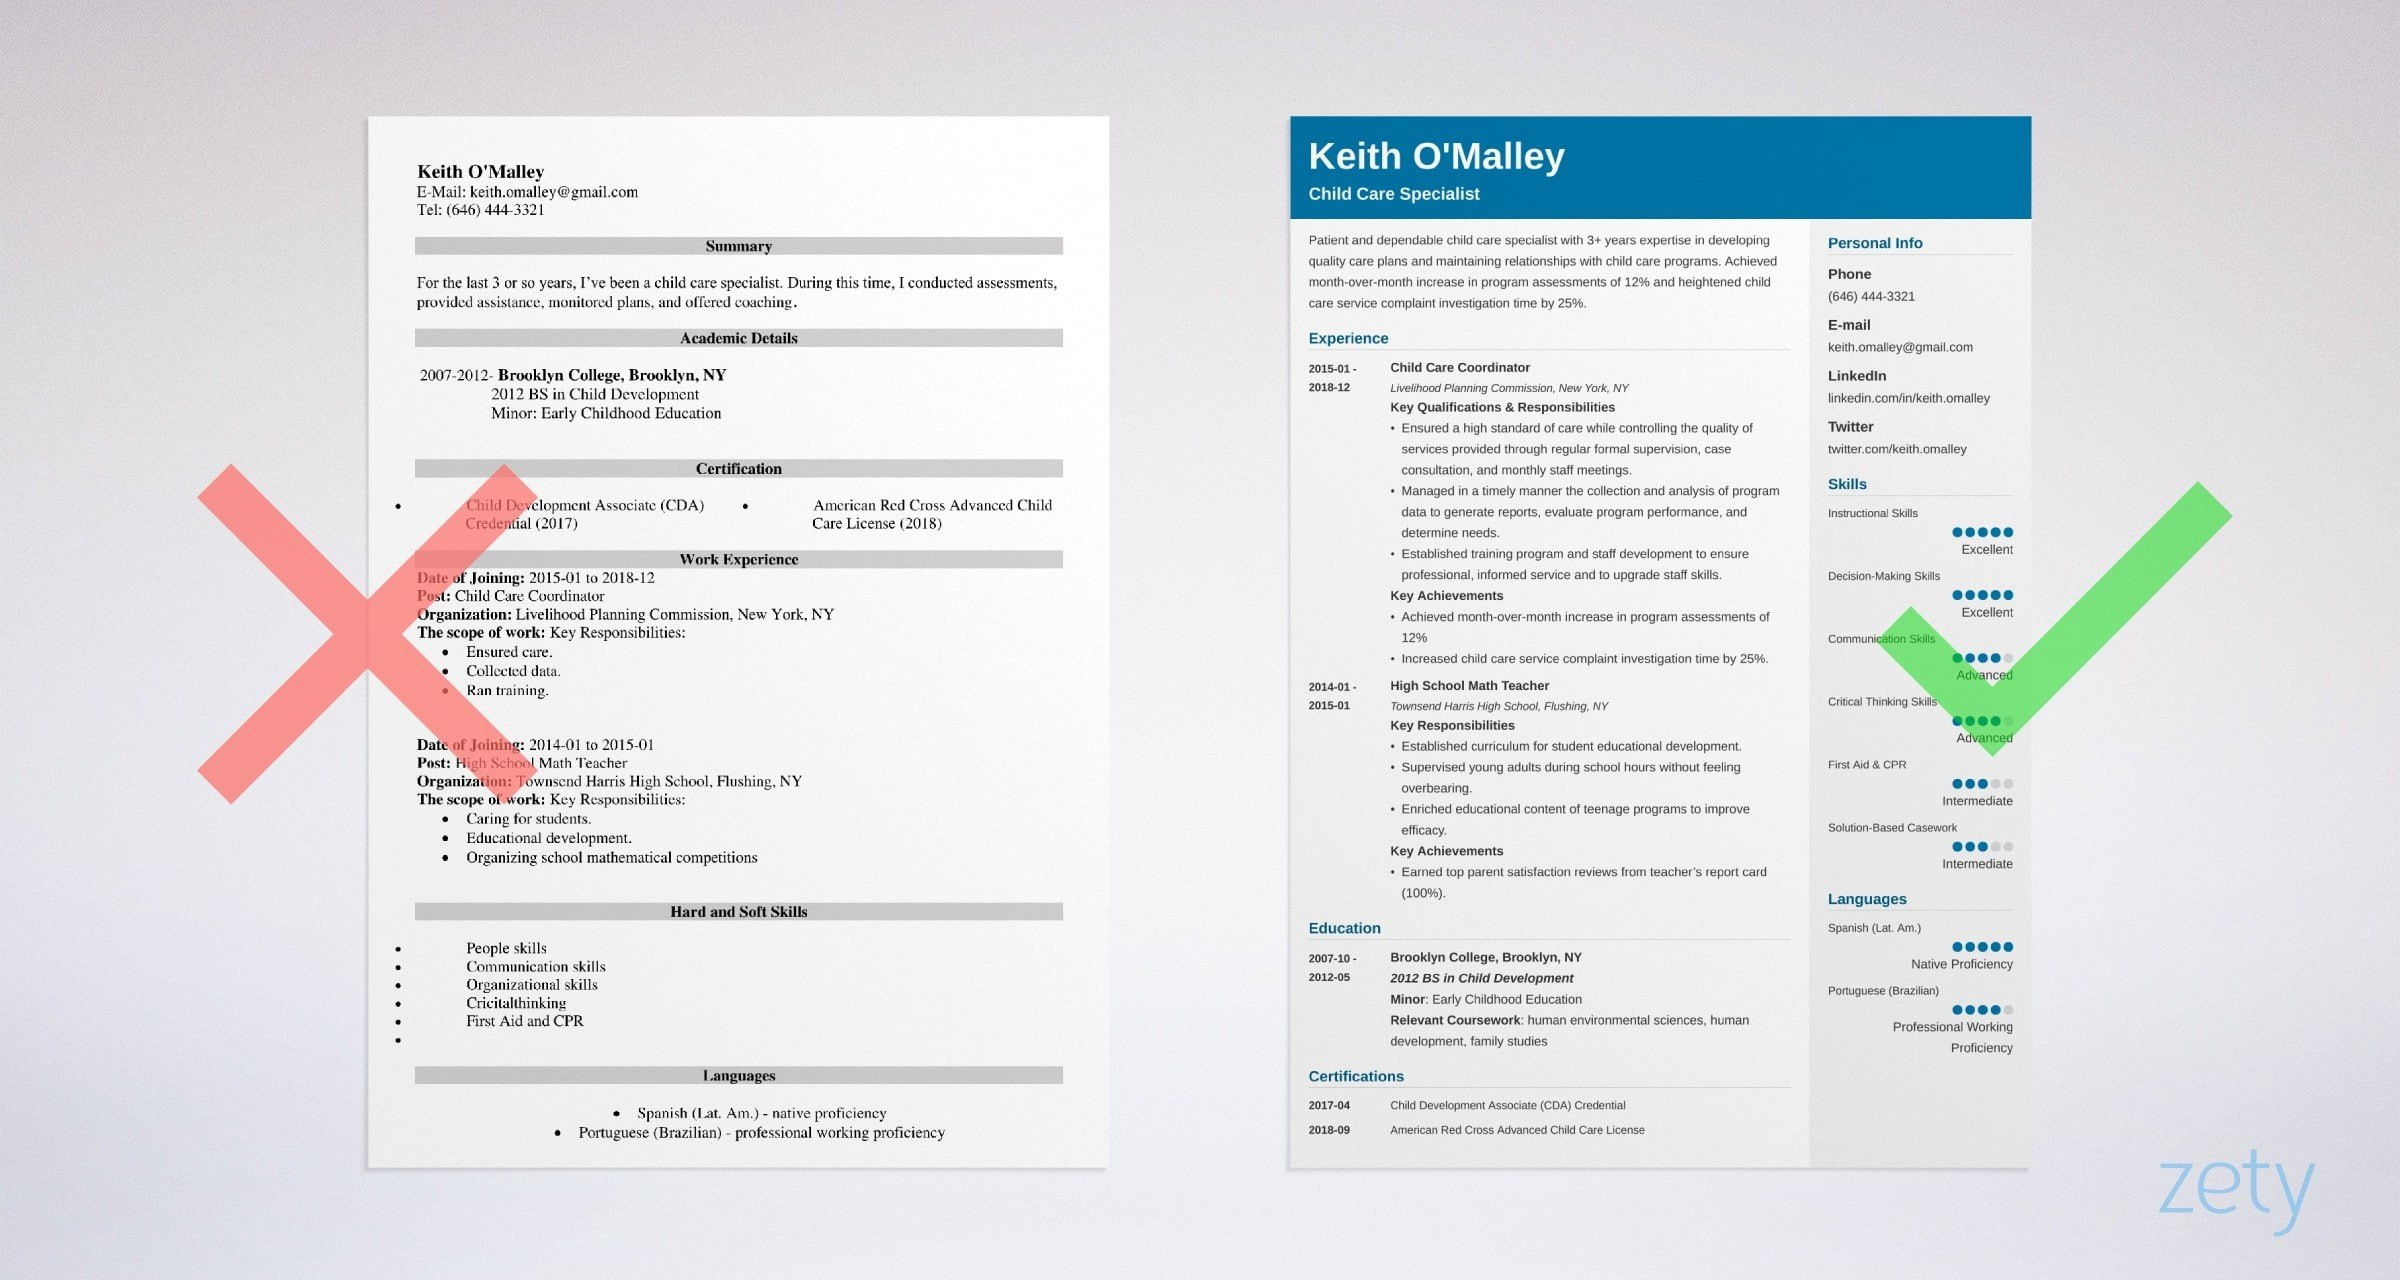 Child and Youth Care Worker Resume Sample Child Care Provider Resume Example [with Skills & Objectives]